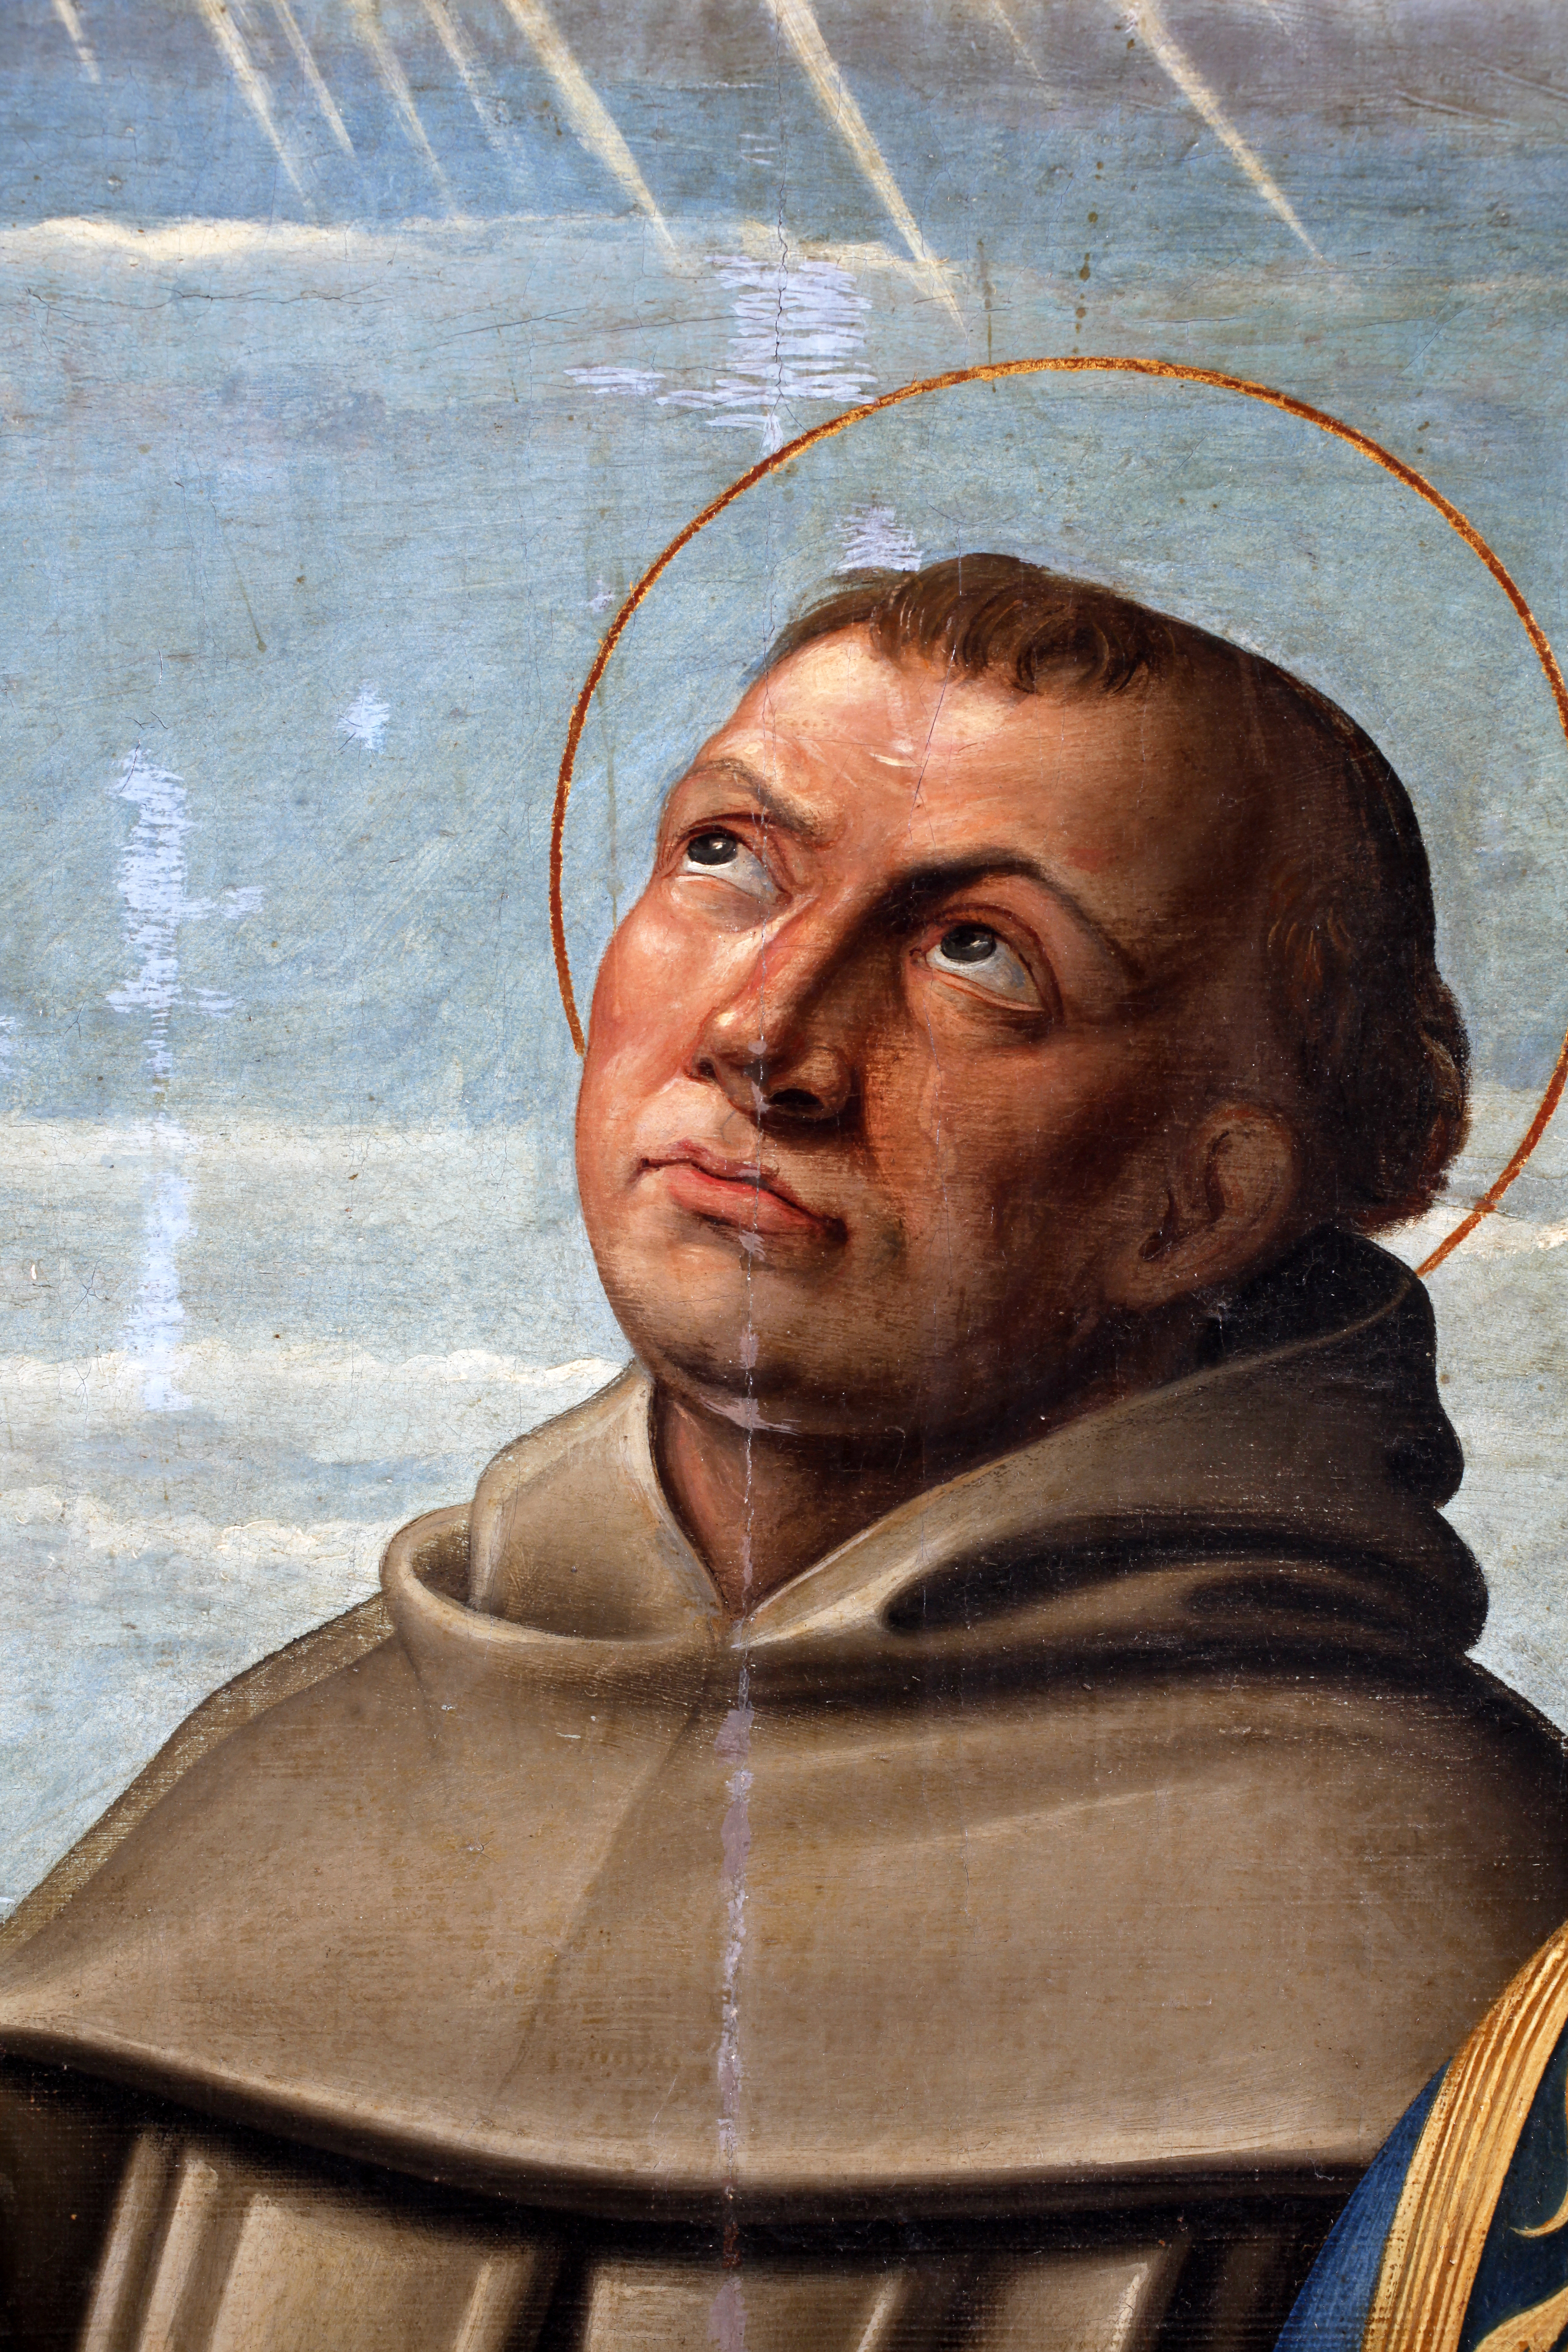 St. Anthony of Padua: Finder of More Than Just Lost Items (Special Podcast Highlight)